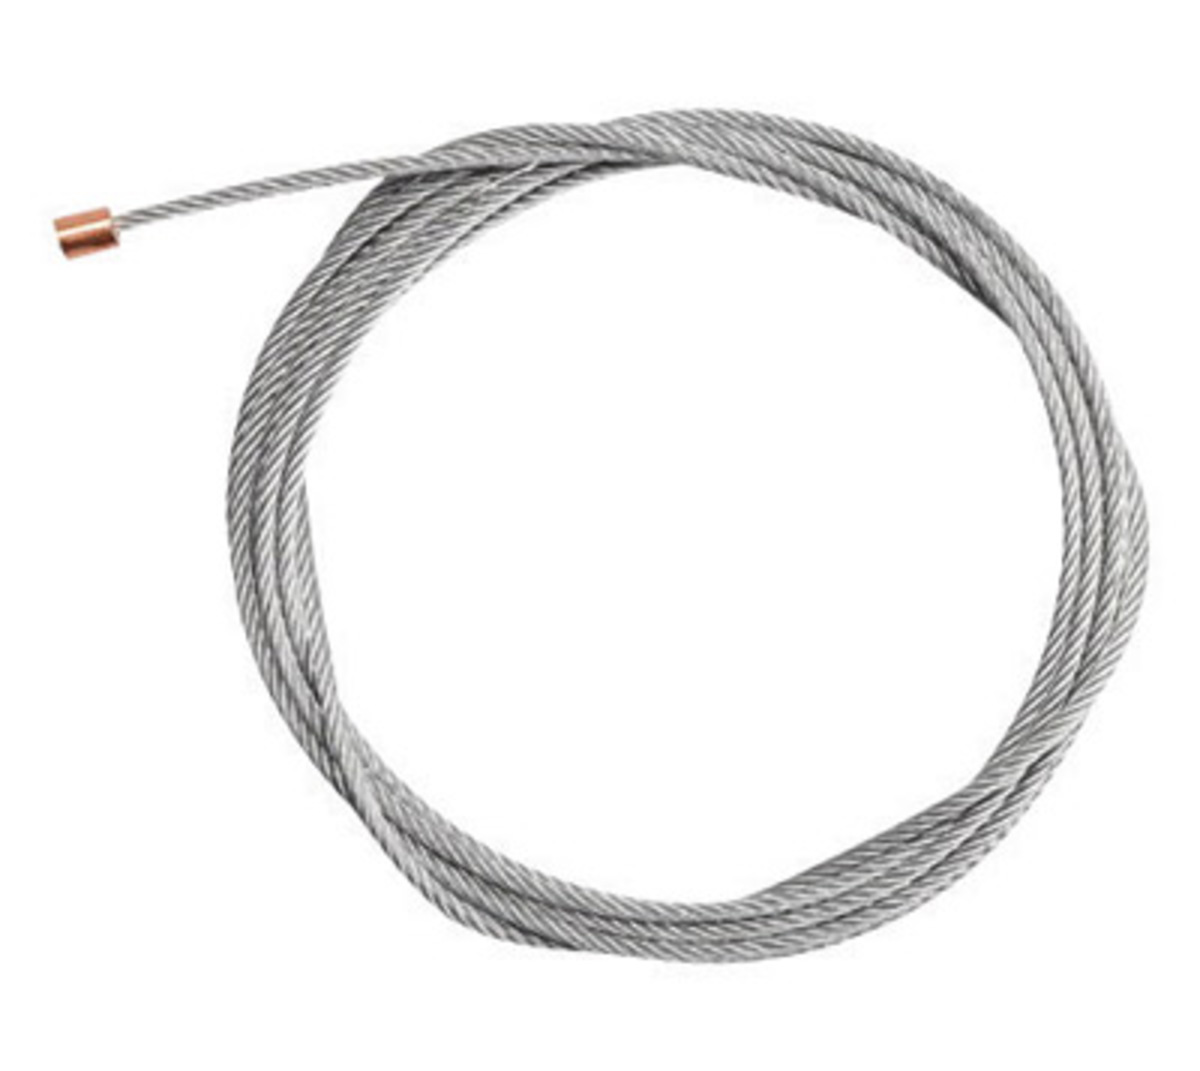 Brady® Gray Steel Lockout Cable